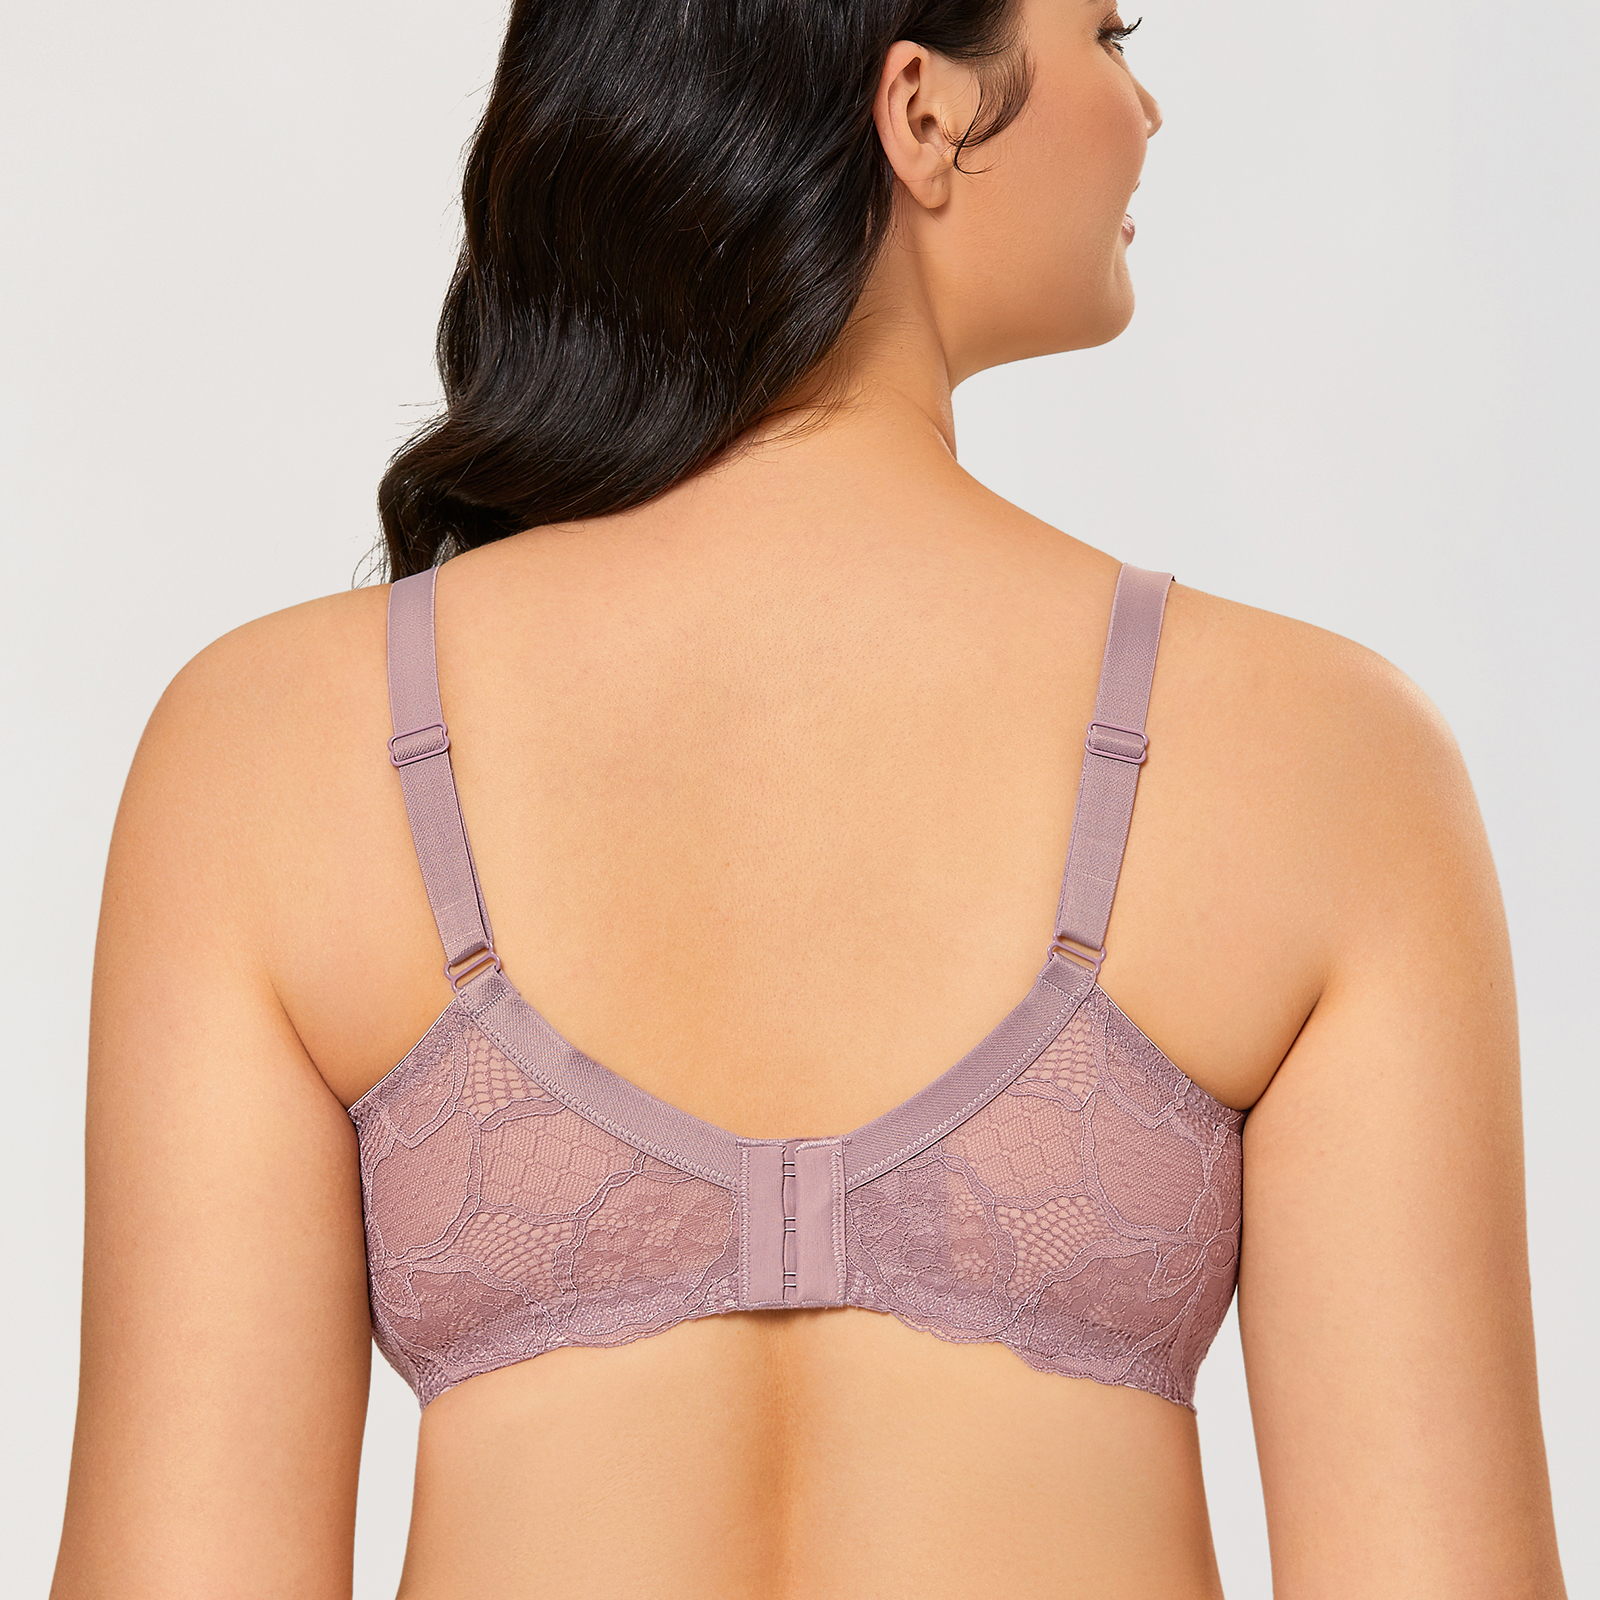 DOBREVA Womens Wireless Minimizer Lace Bra Full Coverage Plus Size Unlined  Bralette A E Cup 210623 From Dou01, $13.45